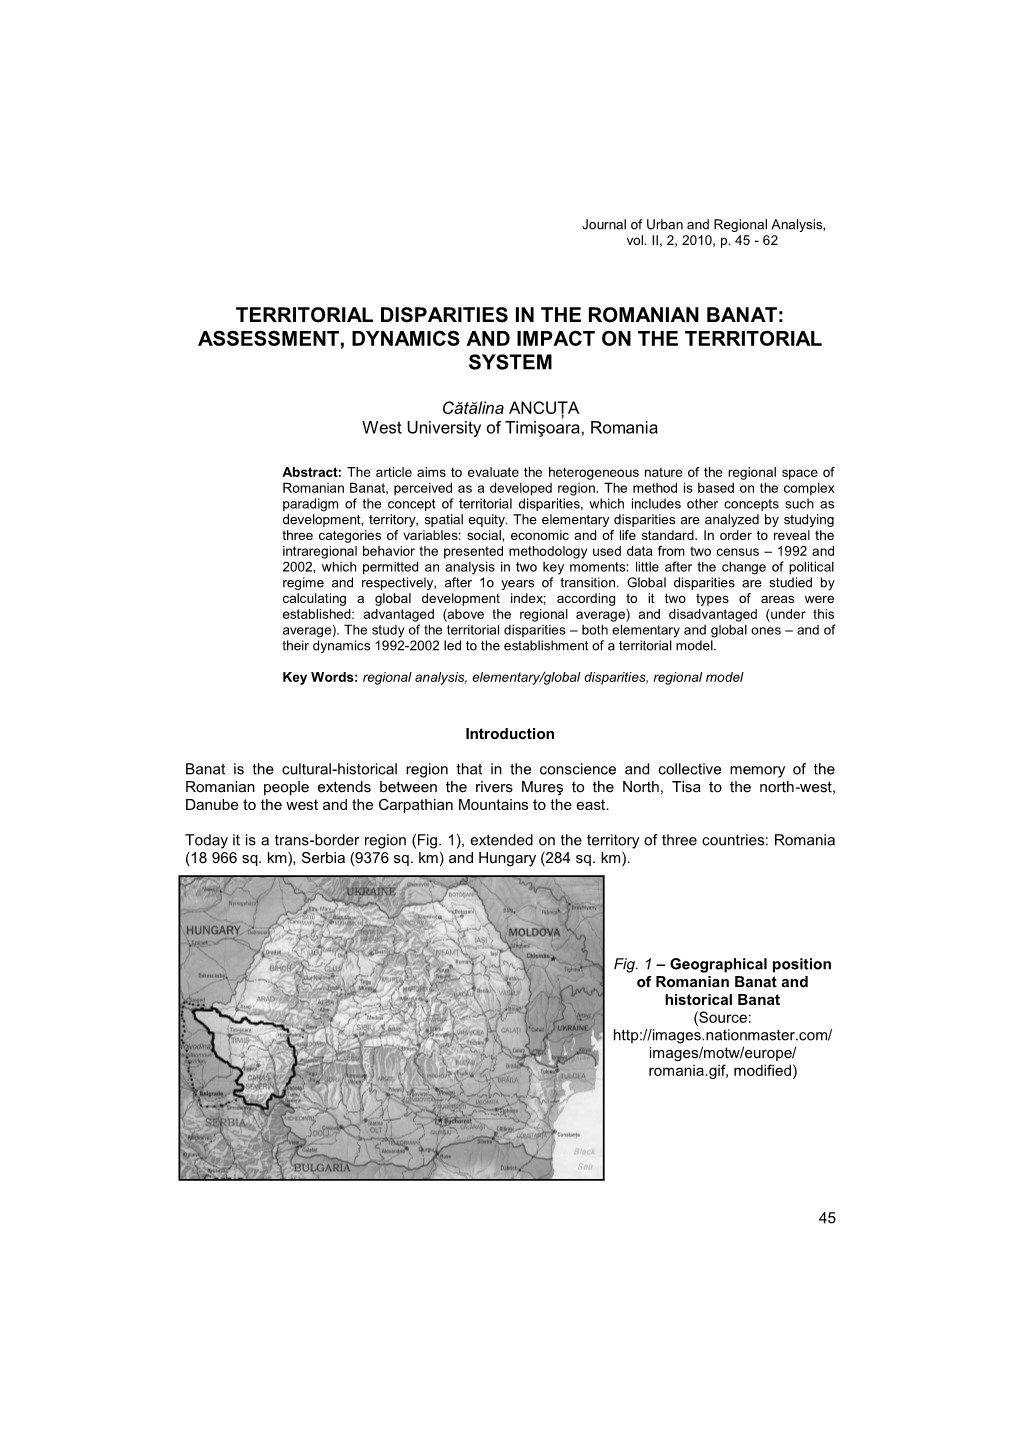 Territorial Disparities in the Romanian Banat: Assessment, Dynamics and Impact on the Territorial System